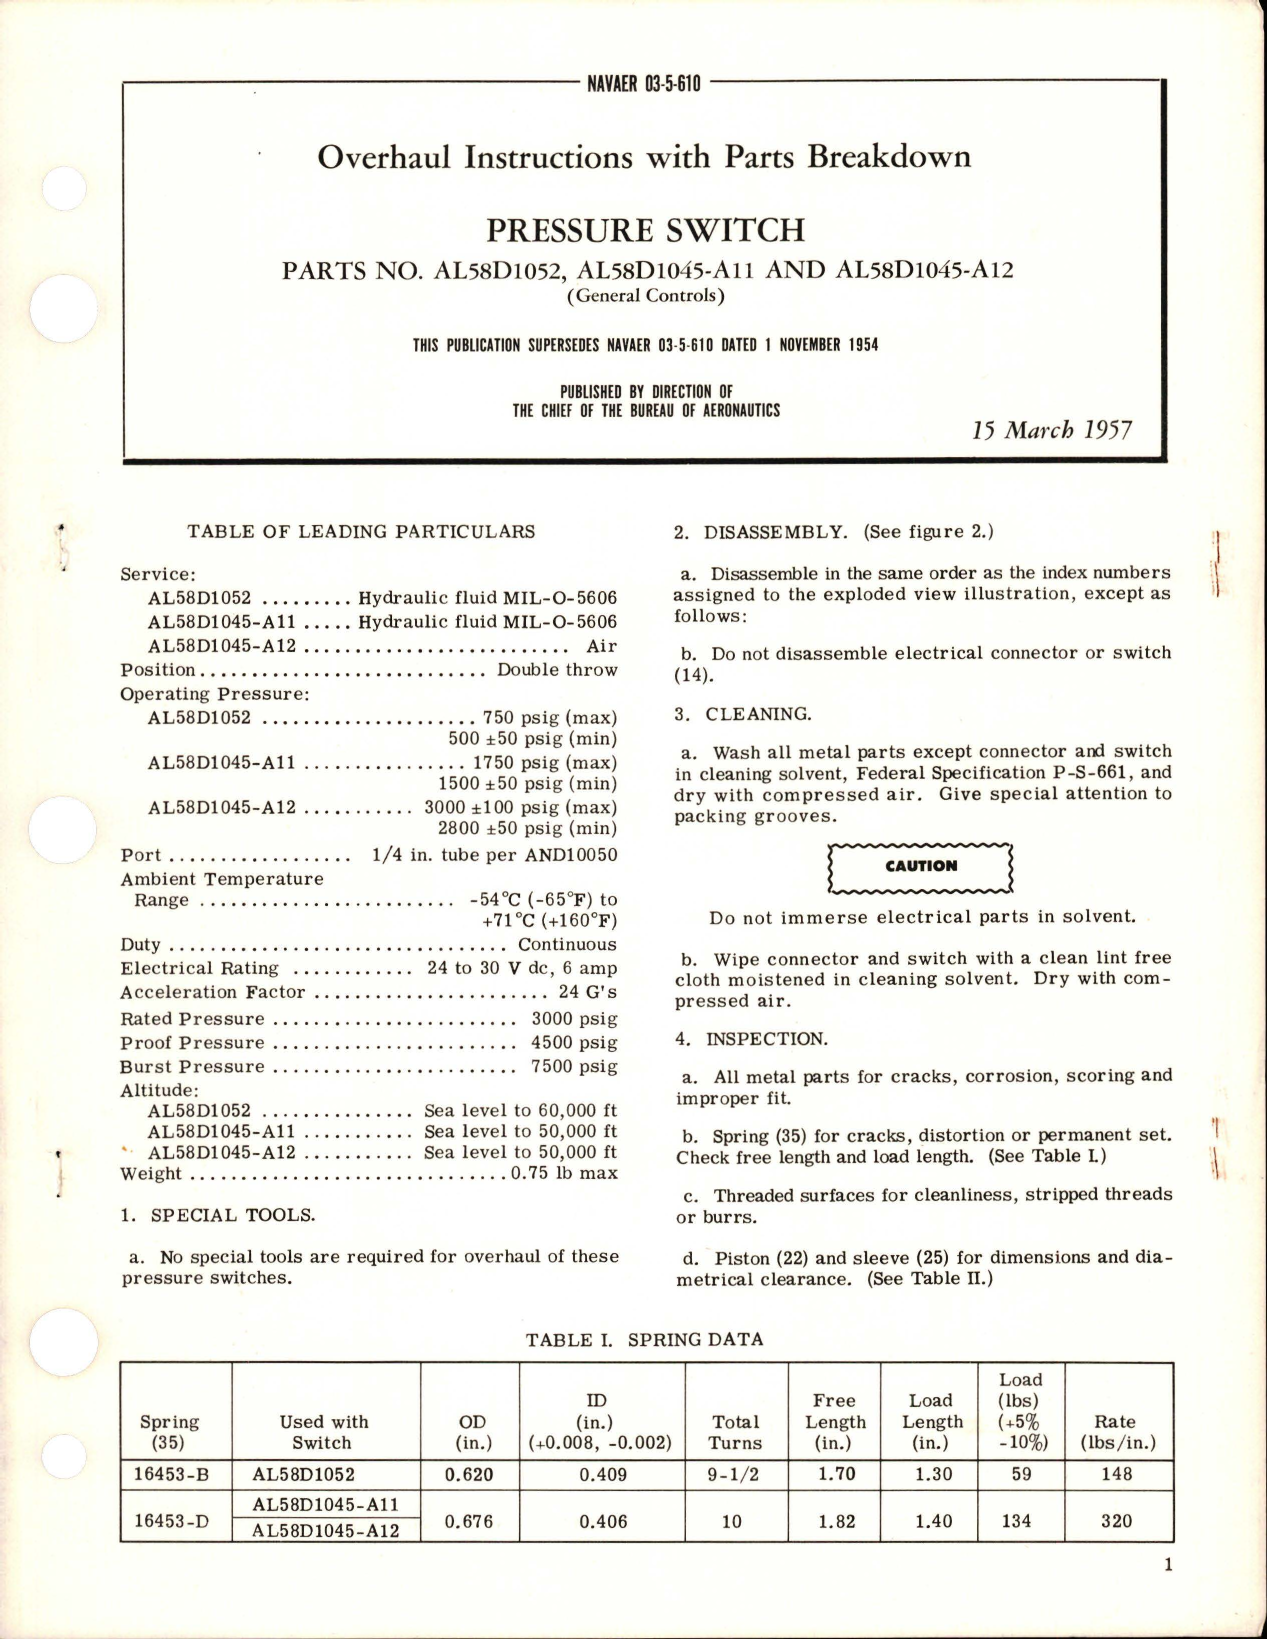 Sample page 1 from AirCorps Library document: Overhaul Instructions with Parts Breakdown for Pressure Switch - Parts AL58D1052, AL58D1045-A11, and AL58D1045-A12